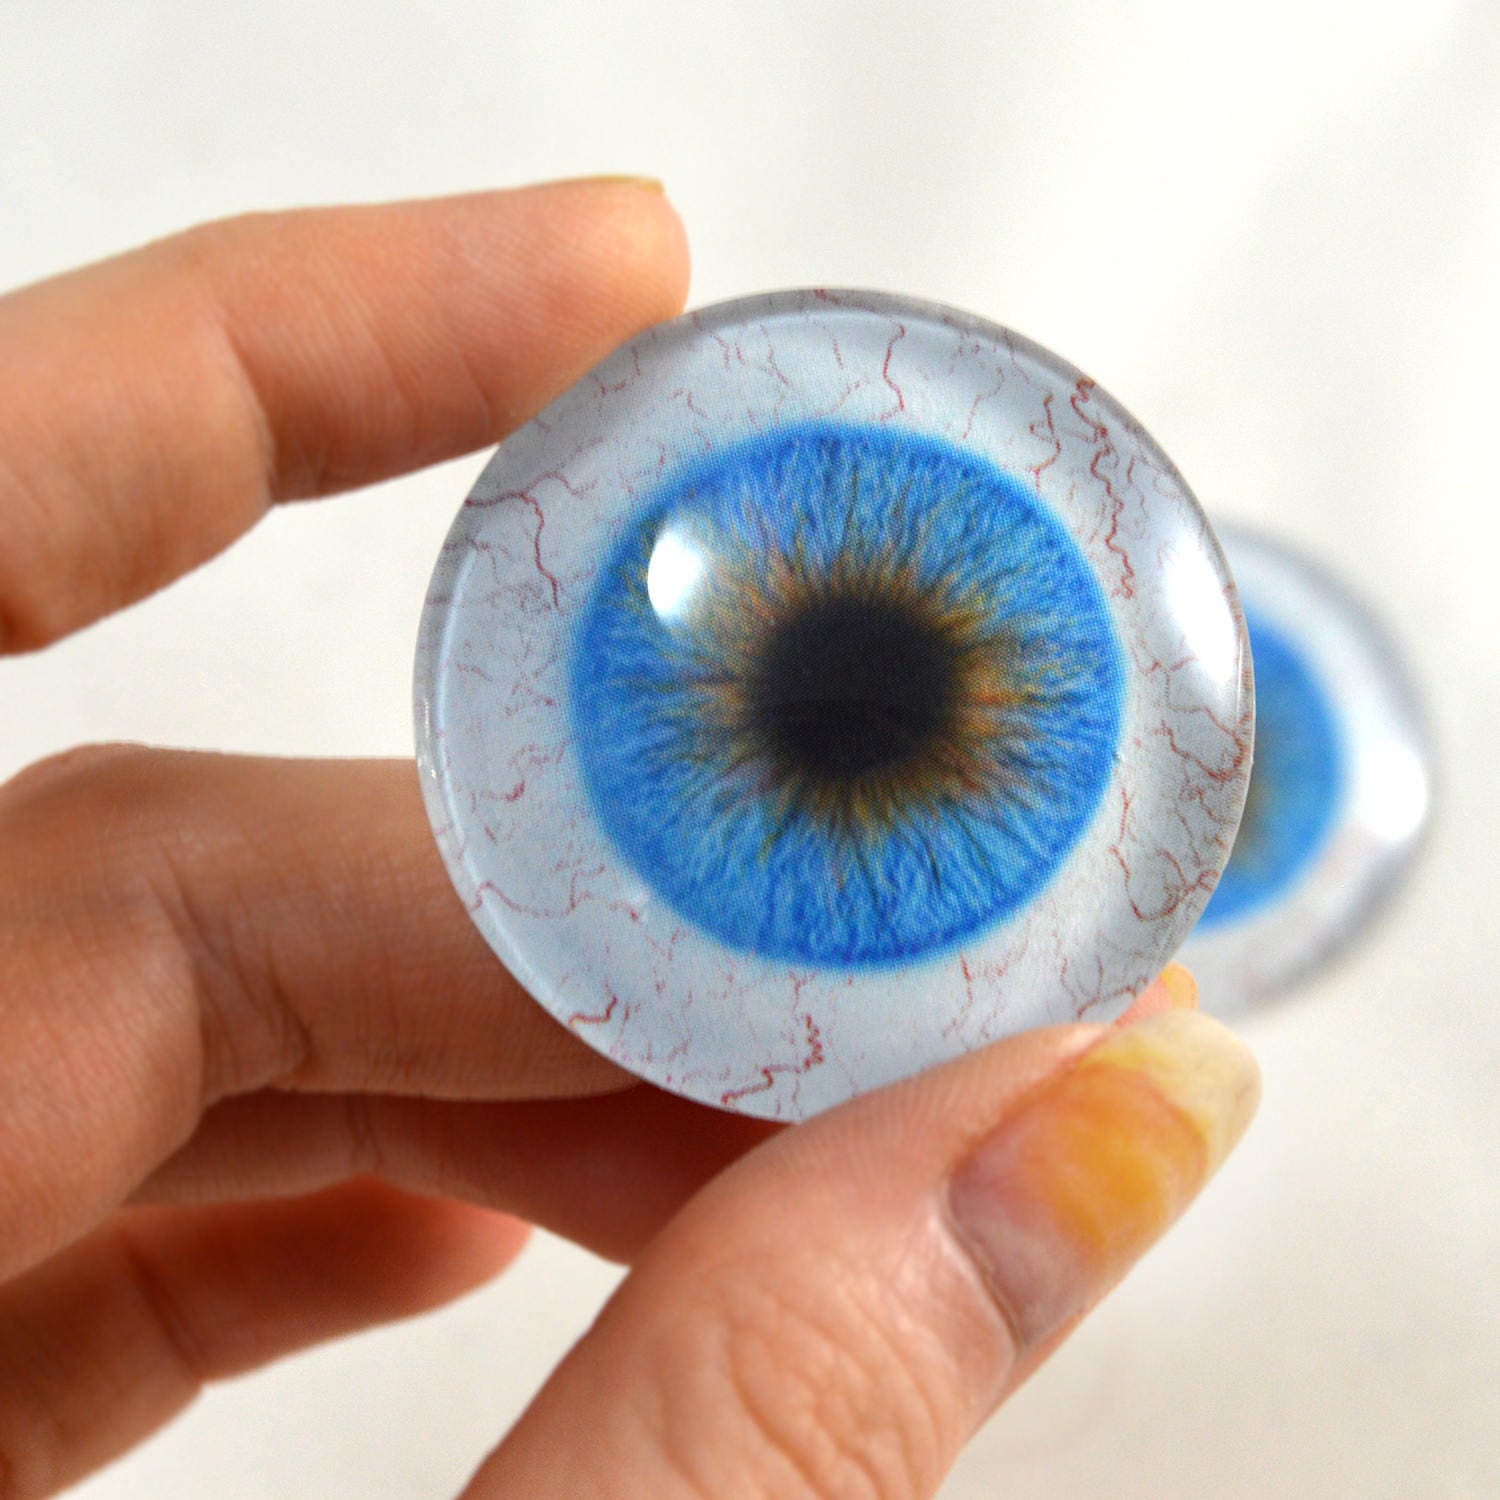 14mm Pair of Blue Human Blythe Glass Eyes, for Jewelry Making, Dolls,  Sculptures, More